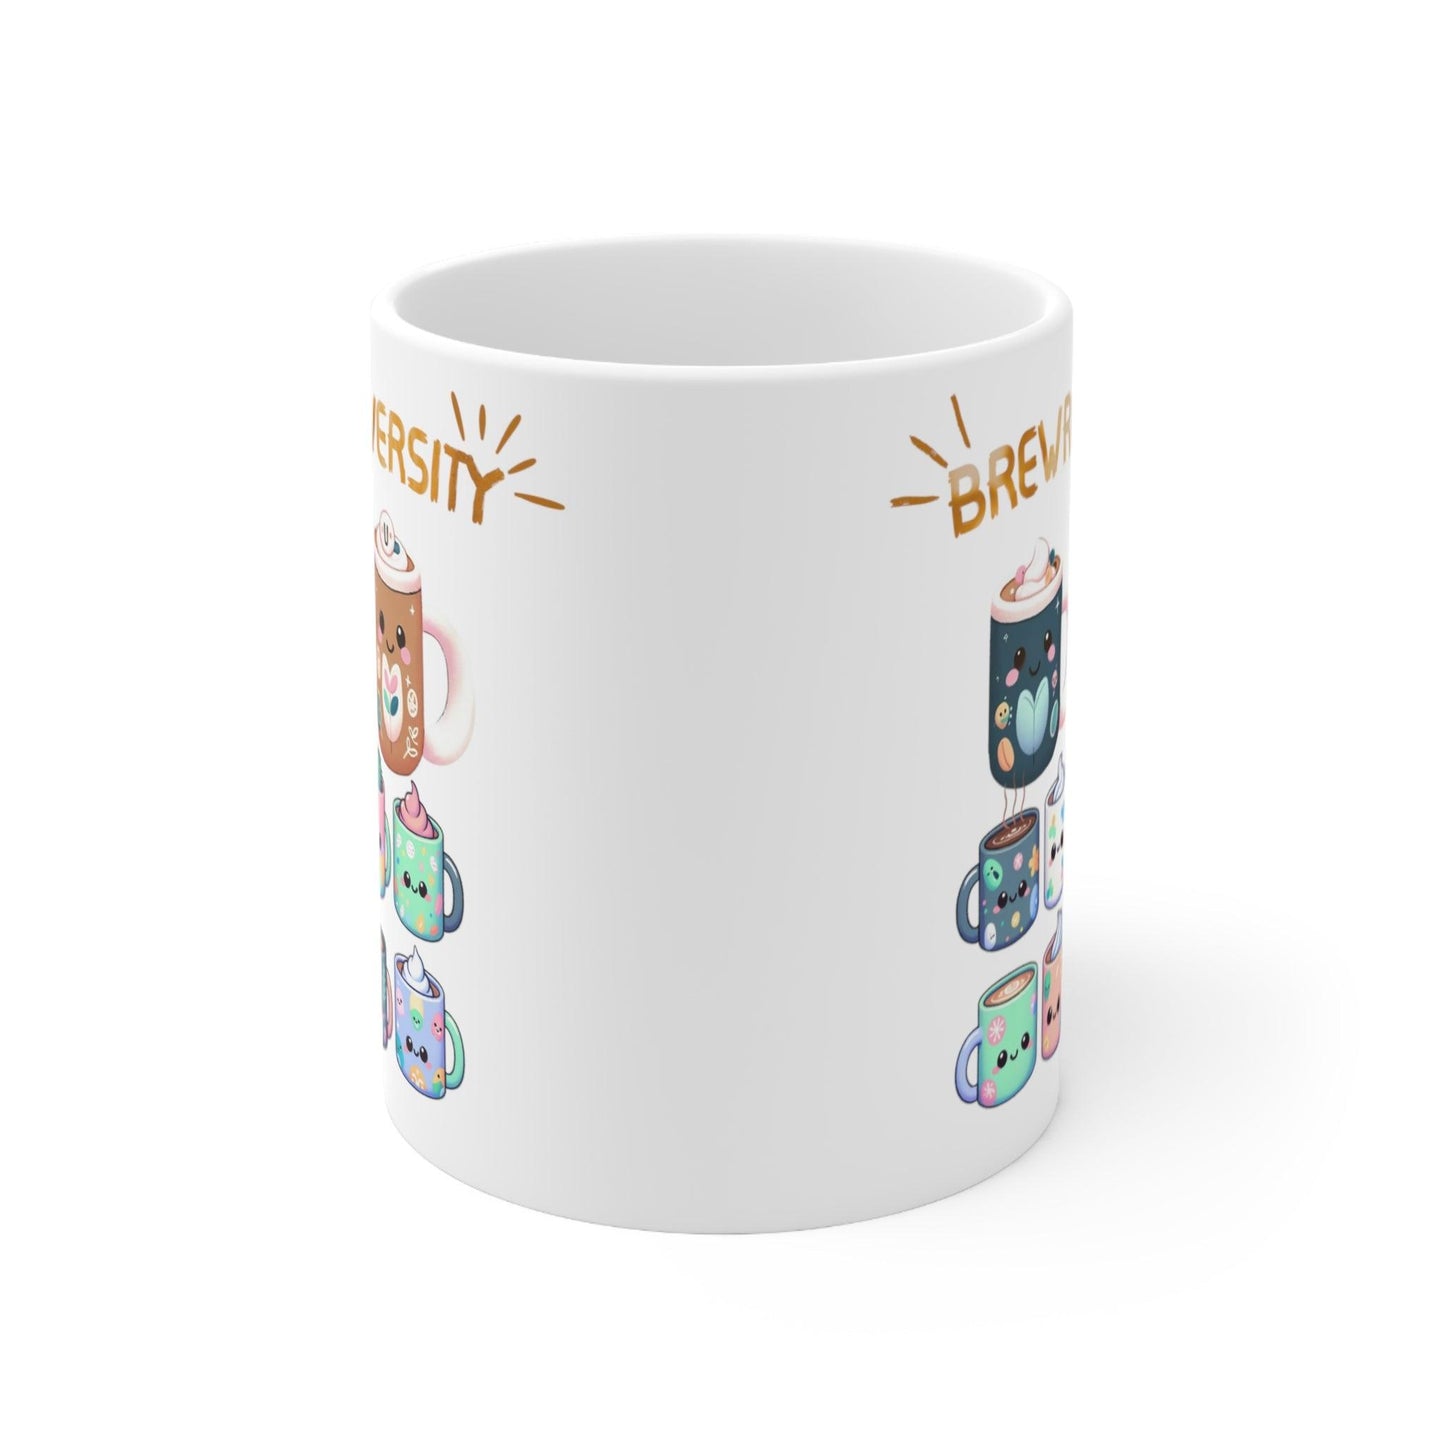 Neurodiversity Coffee Mug - 'Brewrodiversity' Cup for Inclusive Mornings - Unique Ceramic ADHD gift - Fidget and Focus